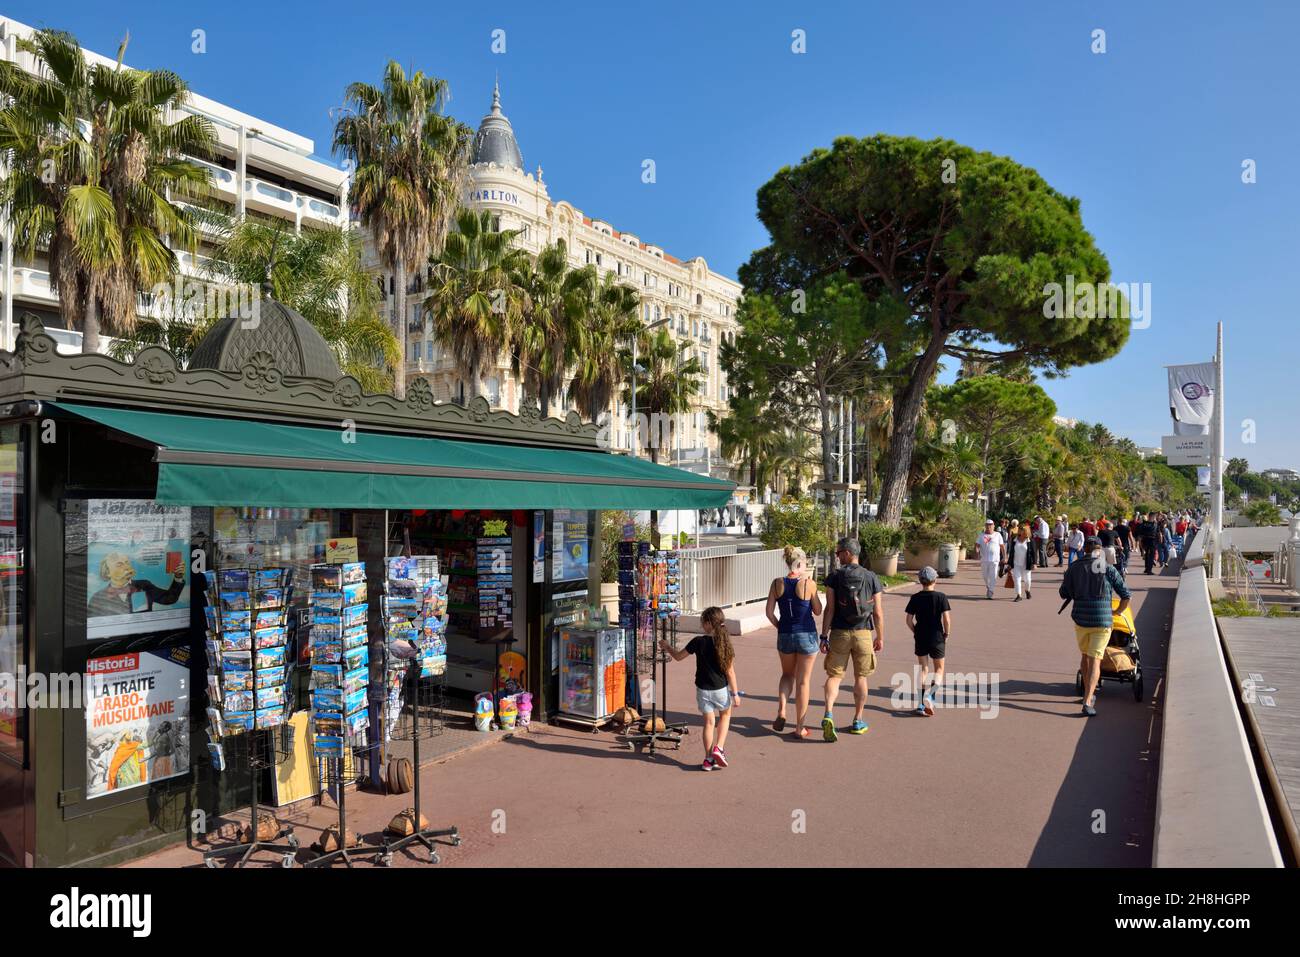 France, Alpes-Maritimes, Cannes, La Croisette, long promenade lined with palm trees and pines and the Carlton Hotel in the background Stock Photo